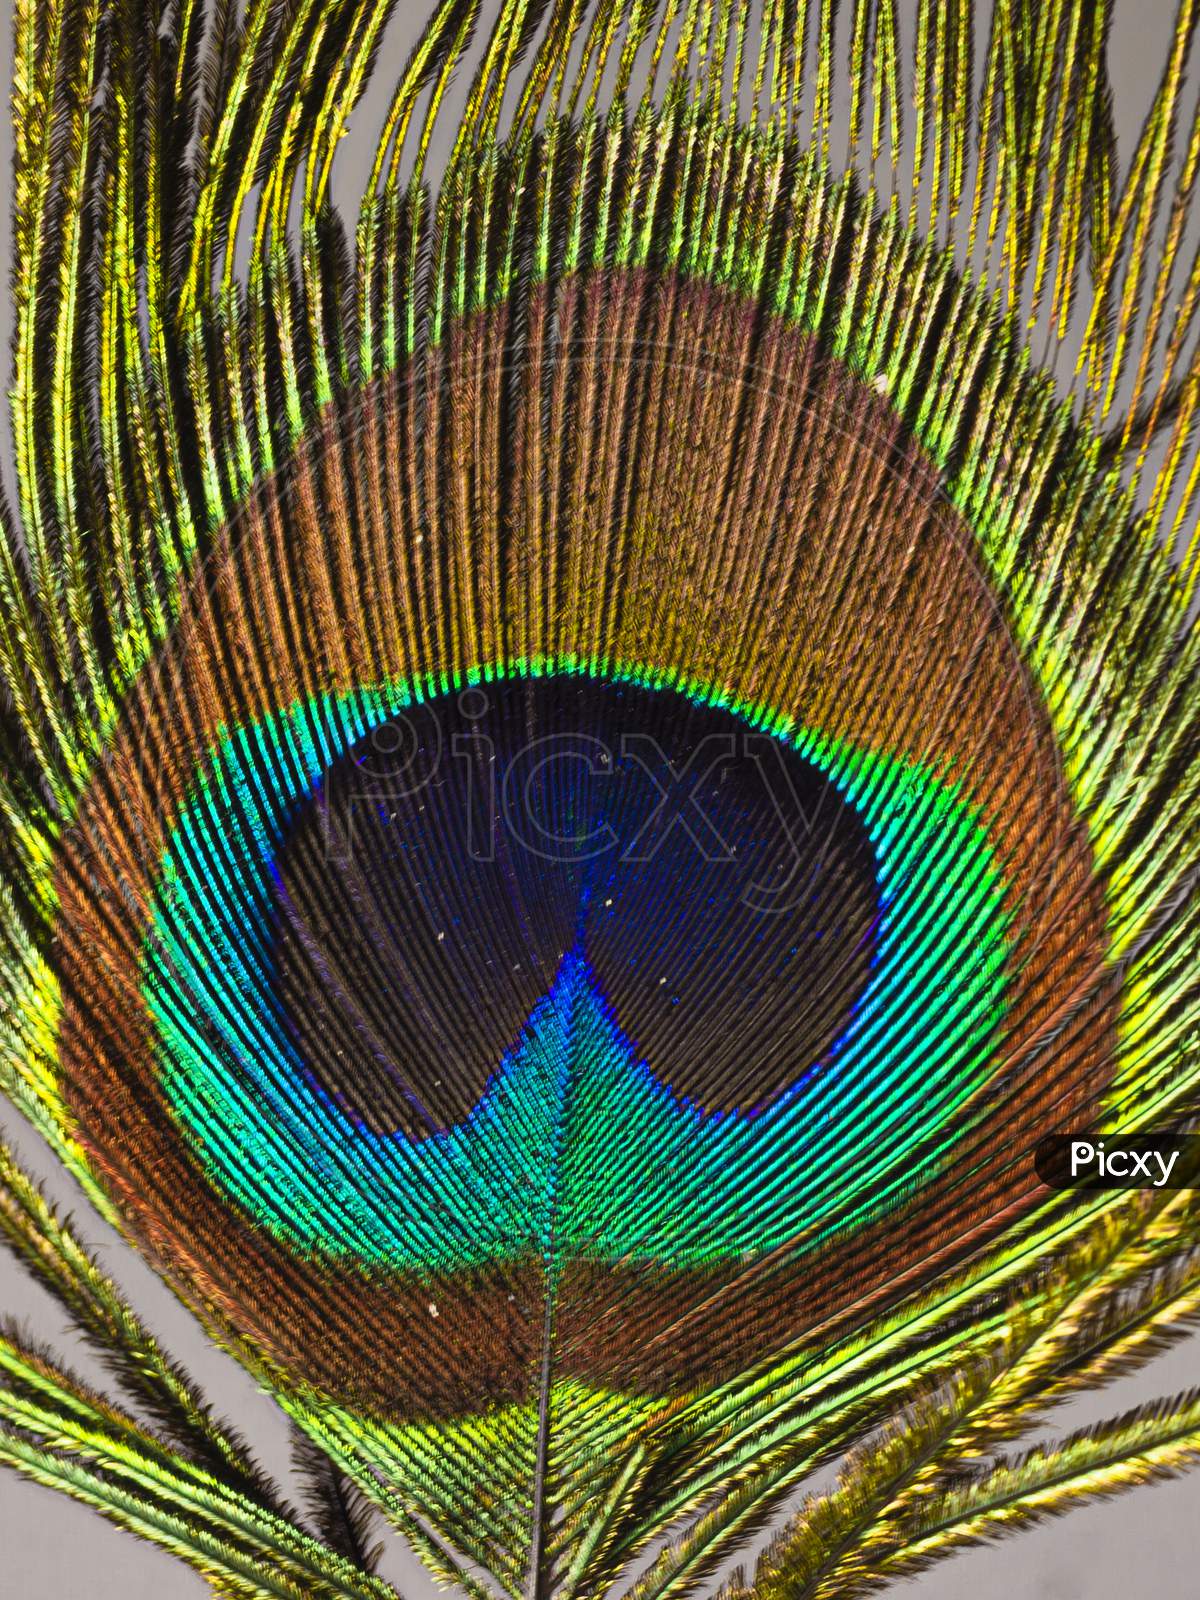 A Beautiful Close up of a peacock feather